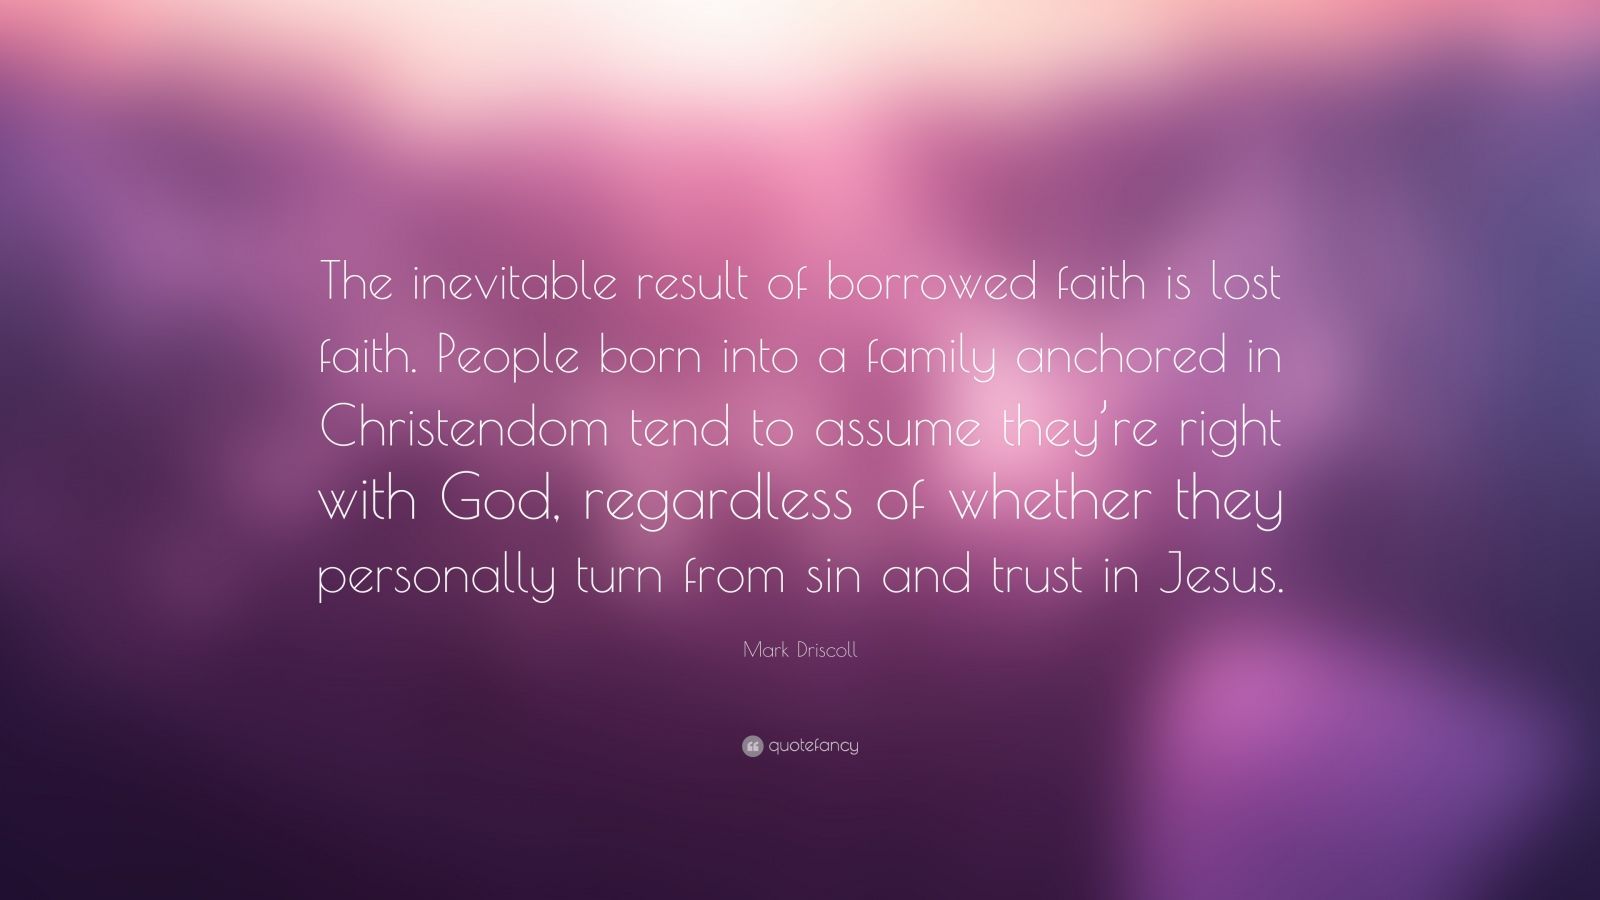 Mark Driscoll Quote: “The inevitable result of borrowed faith is lost ...